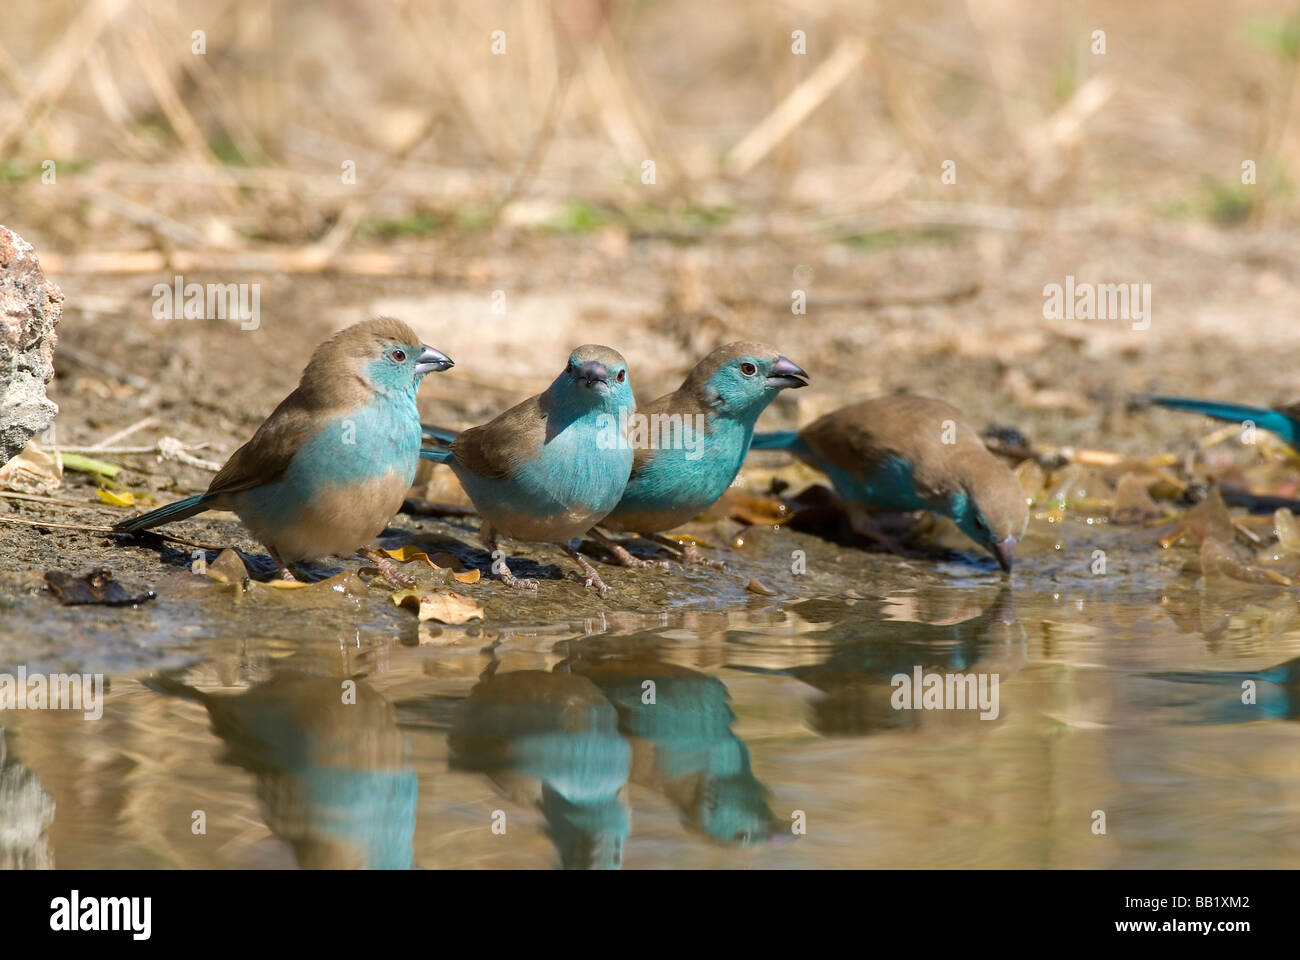 A small flock of Blue Waxbills (Uraeginthus angolensis) drinking, Kruger National Park, South Africa Stock Photo